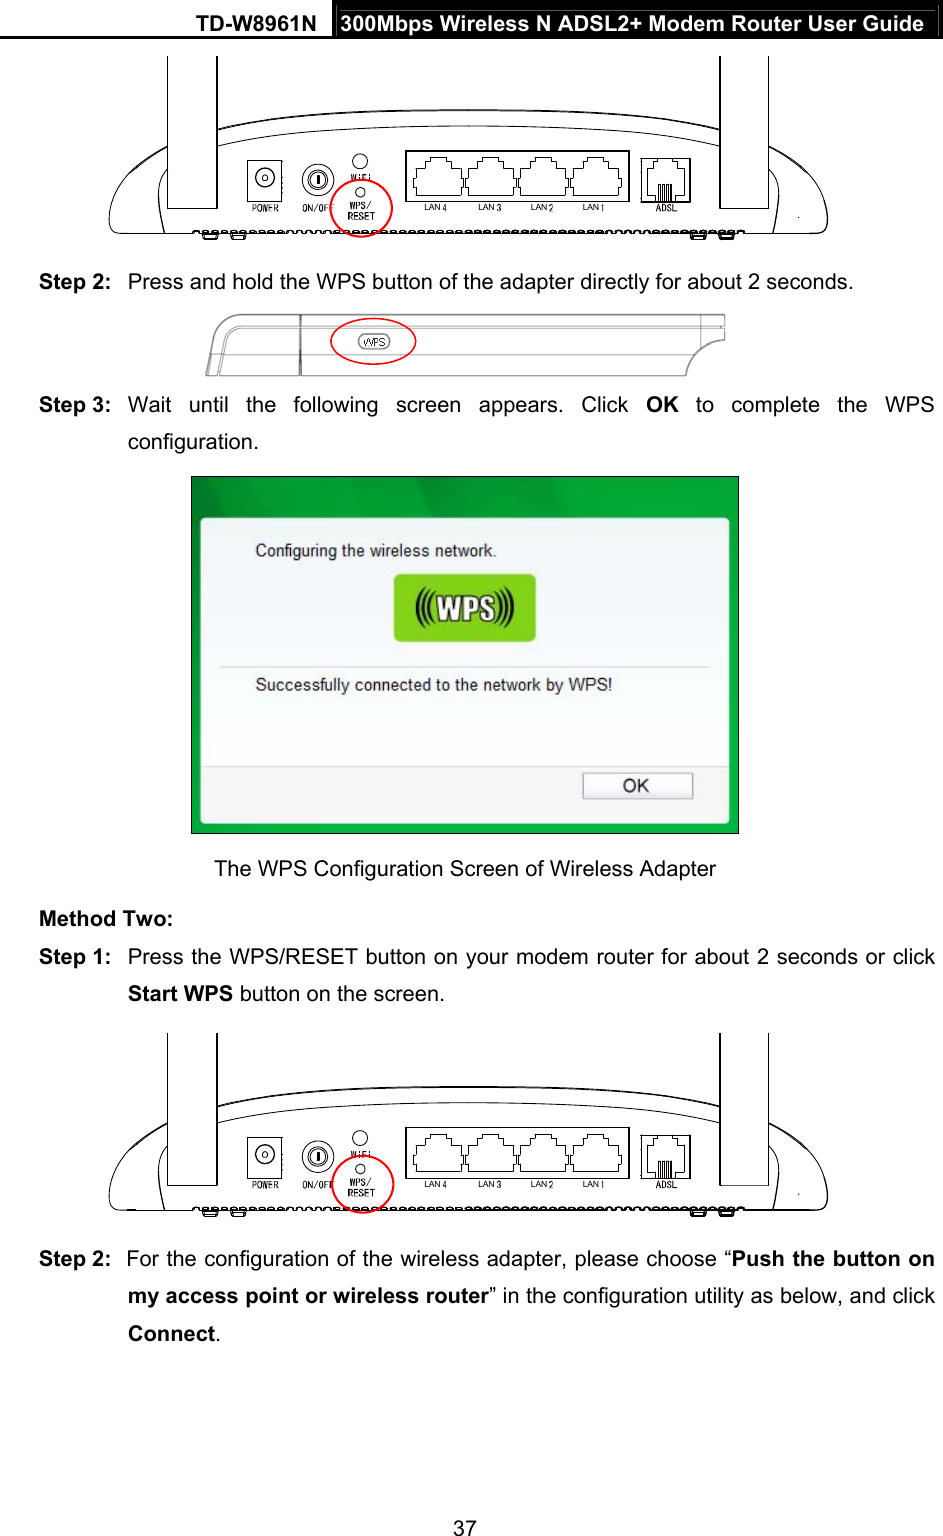 TD-W8961N  300Mbps Wireless N ADSL2+ Modem Router User Guide 37  LAN LAN LAN LAN Step 2:  Press and hold the WPS button of the adapter directly for about 2 seconds.  Step 3:  Wait until the following screen appears. Click OK to complete the WPS configuration.  The WPS Configuration Screen of Wireless Adapter   Method Two: Step 1:  Press the WPS/RESET button on your modem router for about 2 seconds or click Start WPS button on the screen. LAN LAN LAN LAN Step 2:  For the configuration of the wireless adapter, please choose “Push the button on my access point or wireless router” in the configuration utility as below, and click Connect.  